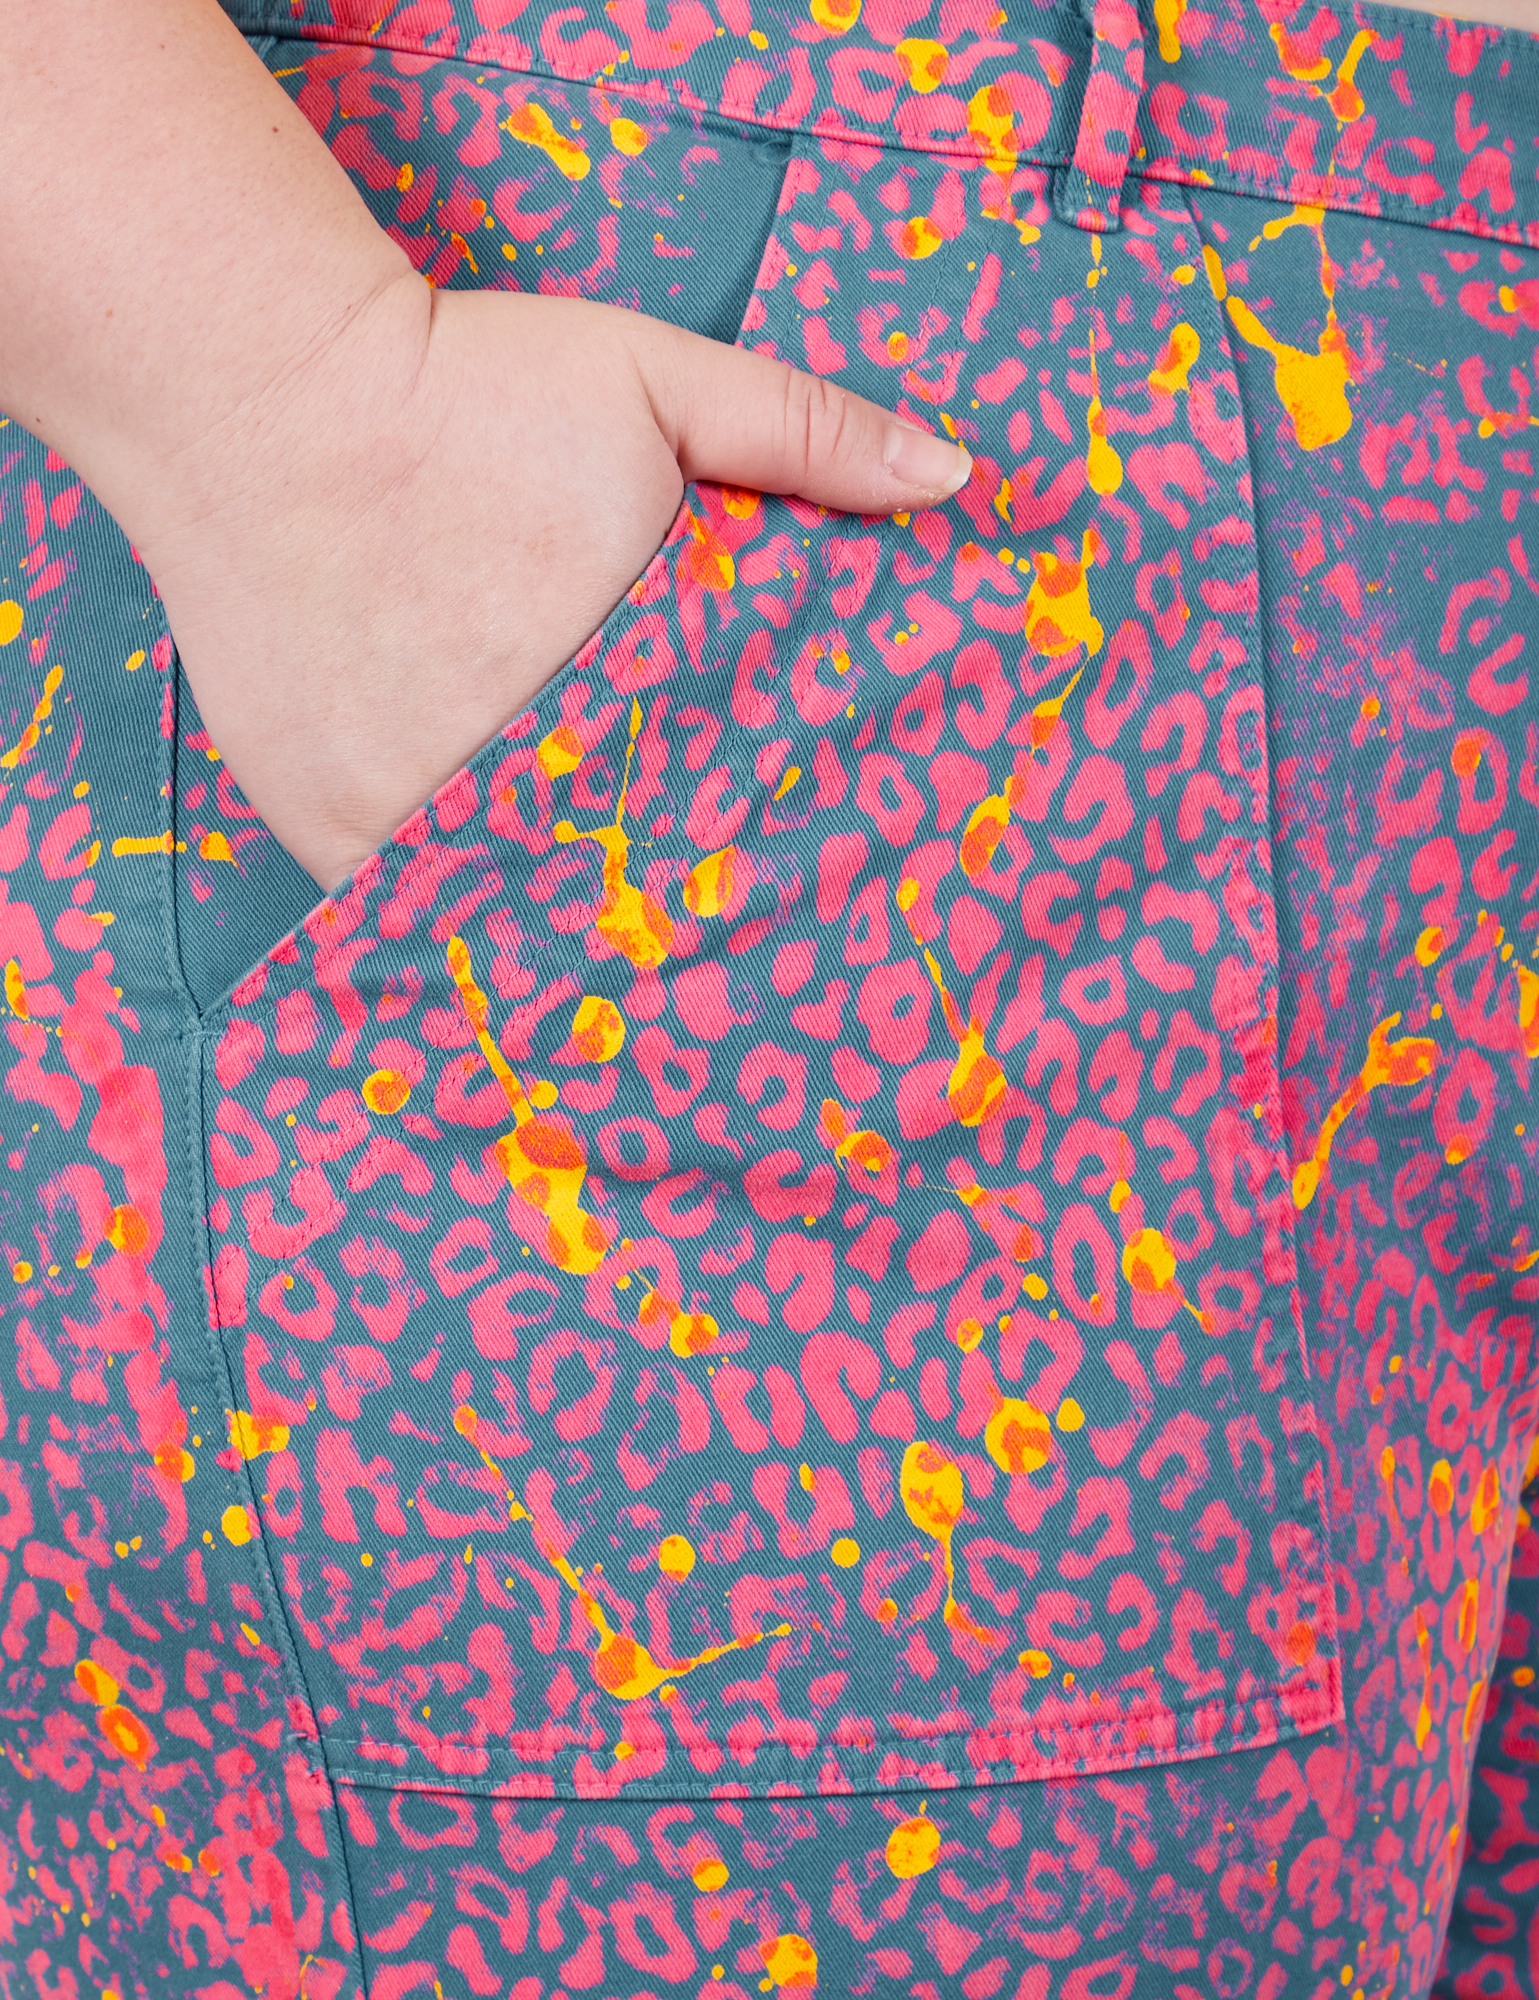 Work Pants in Electric Leopard front pocket close up. Ashley has her hand in the pocket.